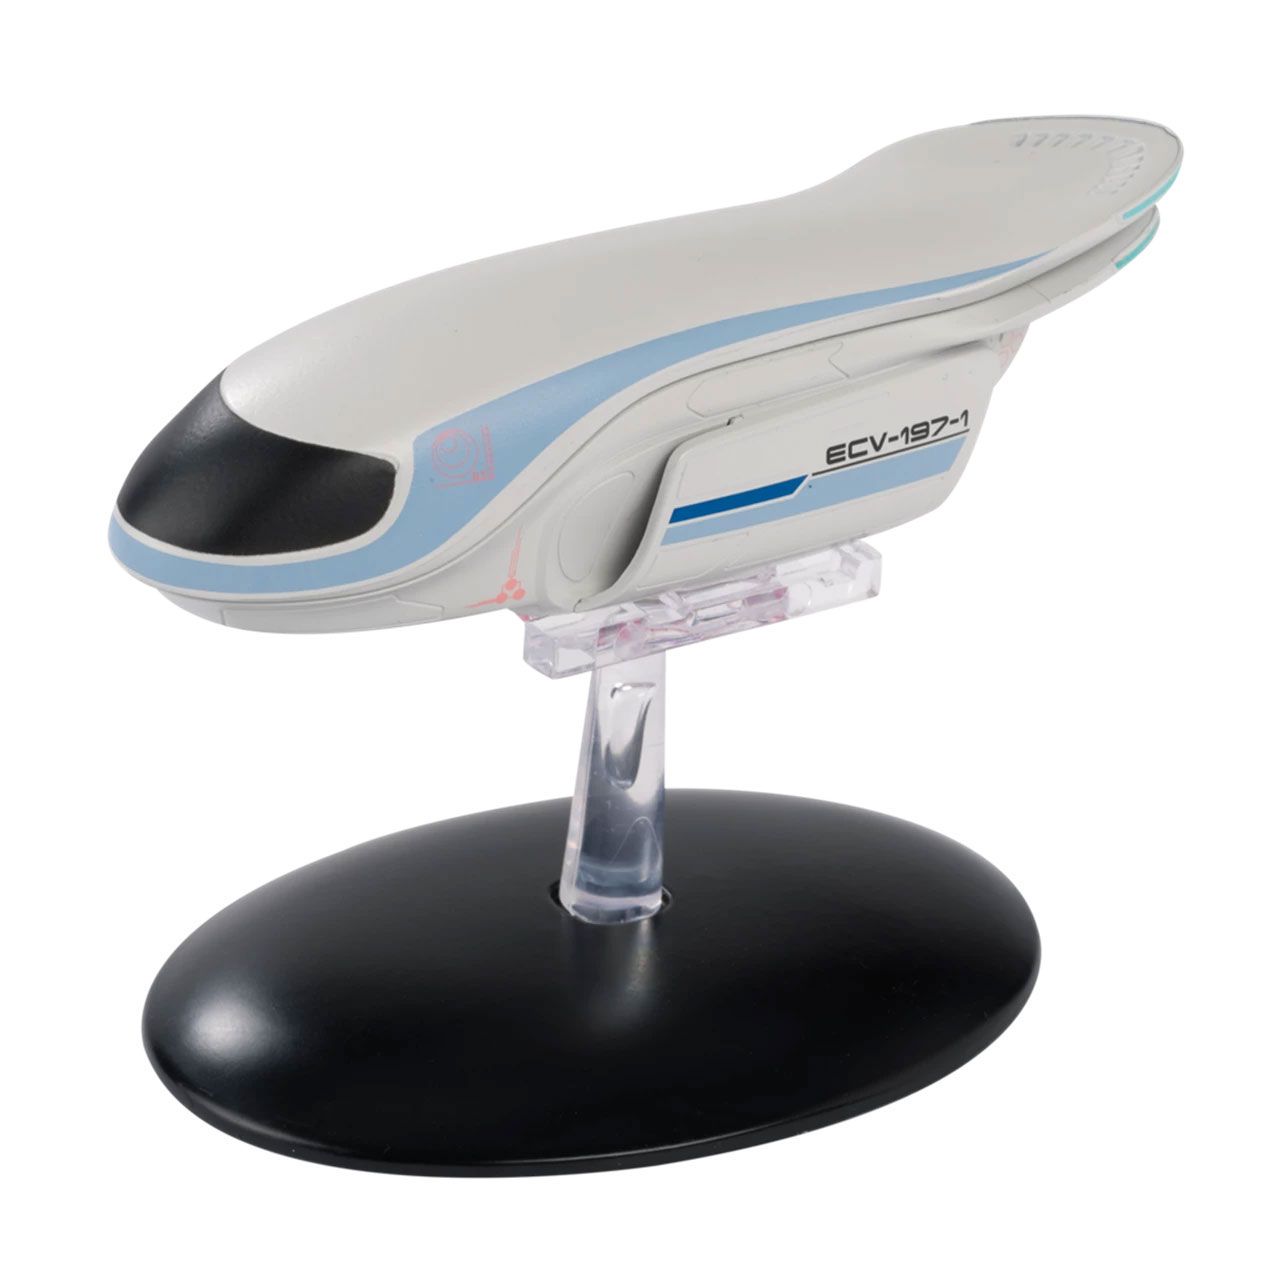 The Orville: The Official Starship Collection Statue Union Shuttle Eaglemoss Publications Ltd.